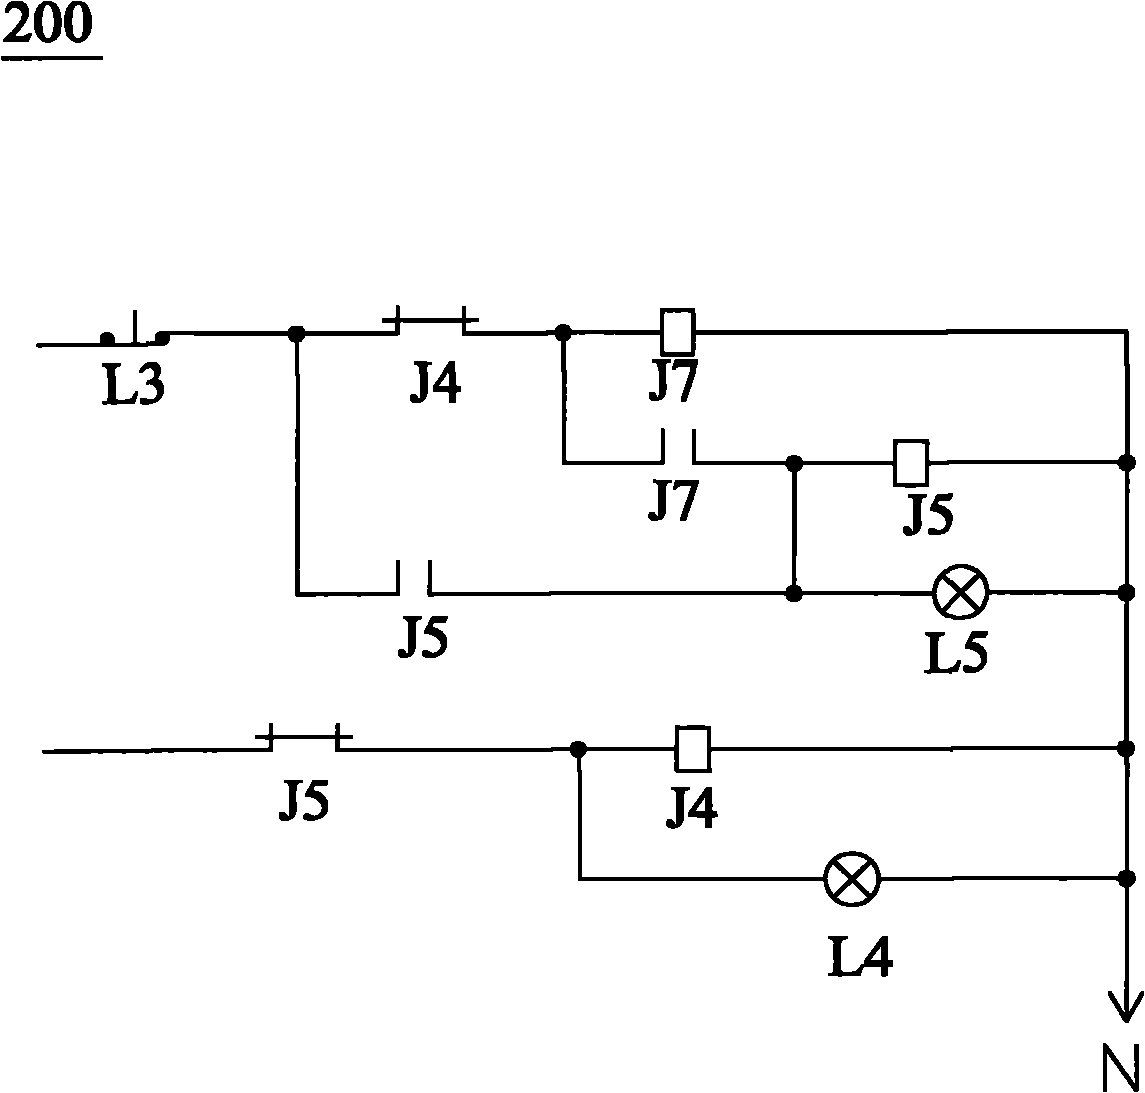 Time delay switching circuit